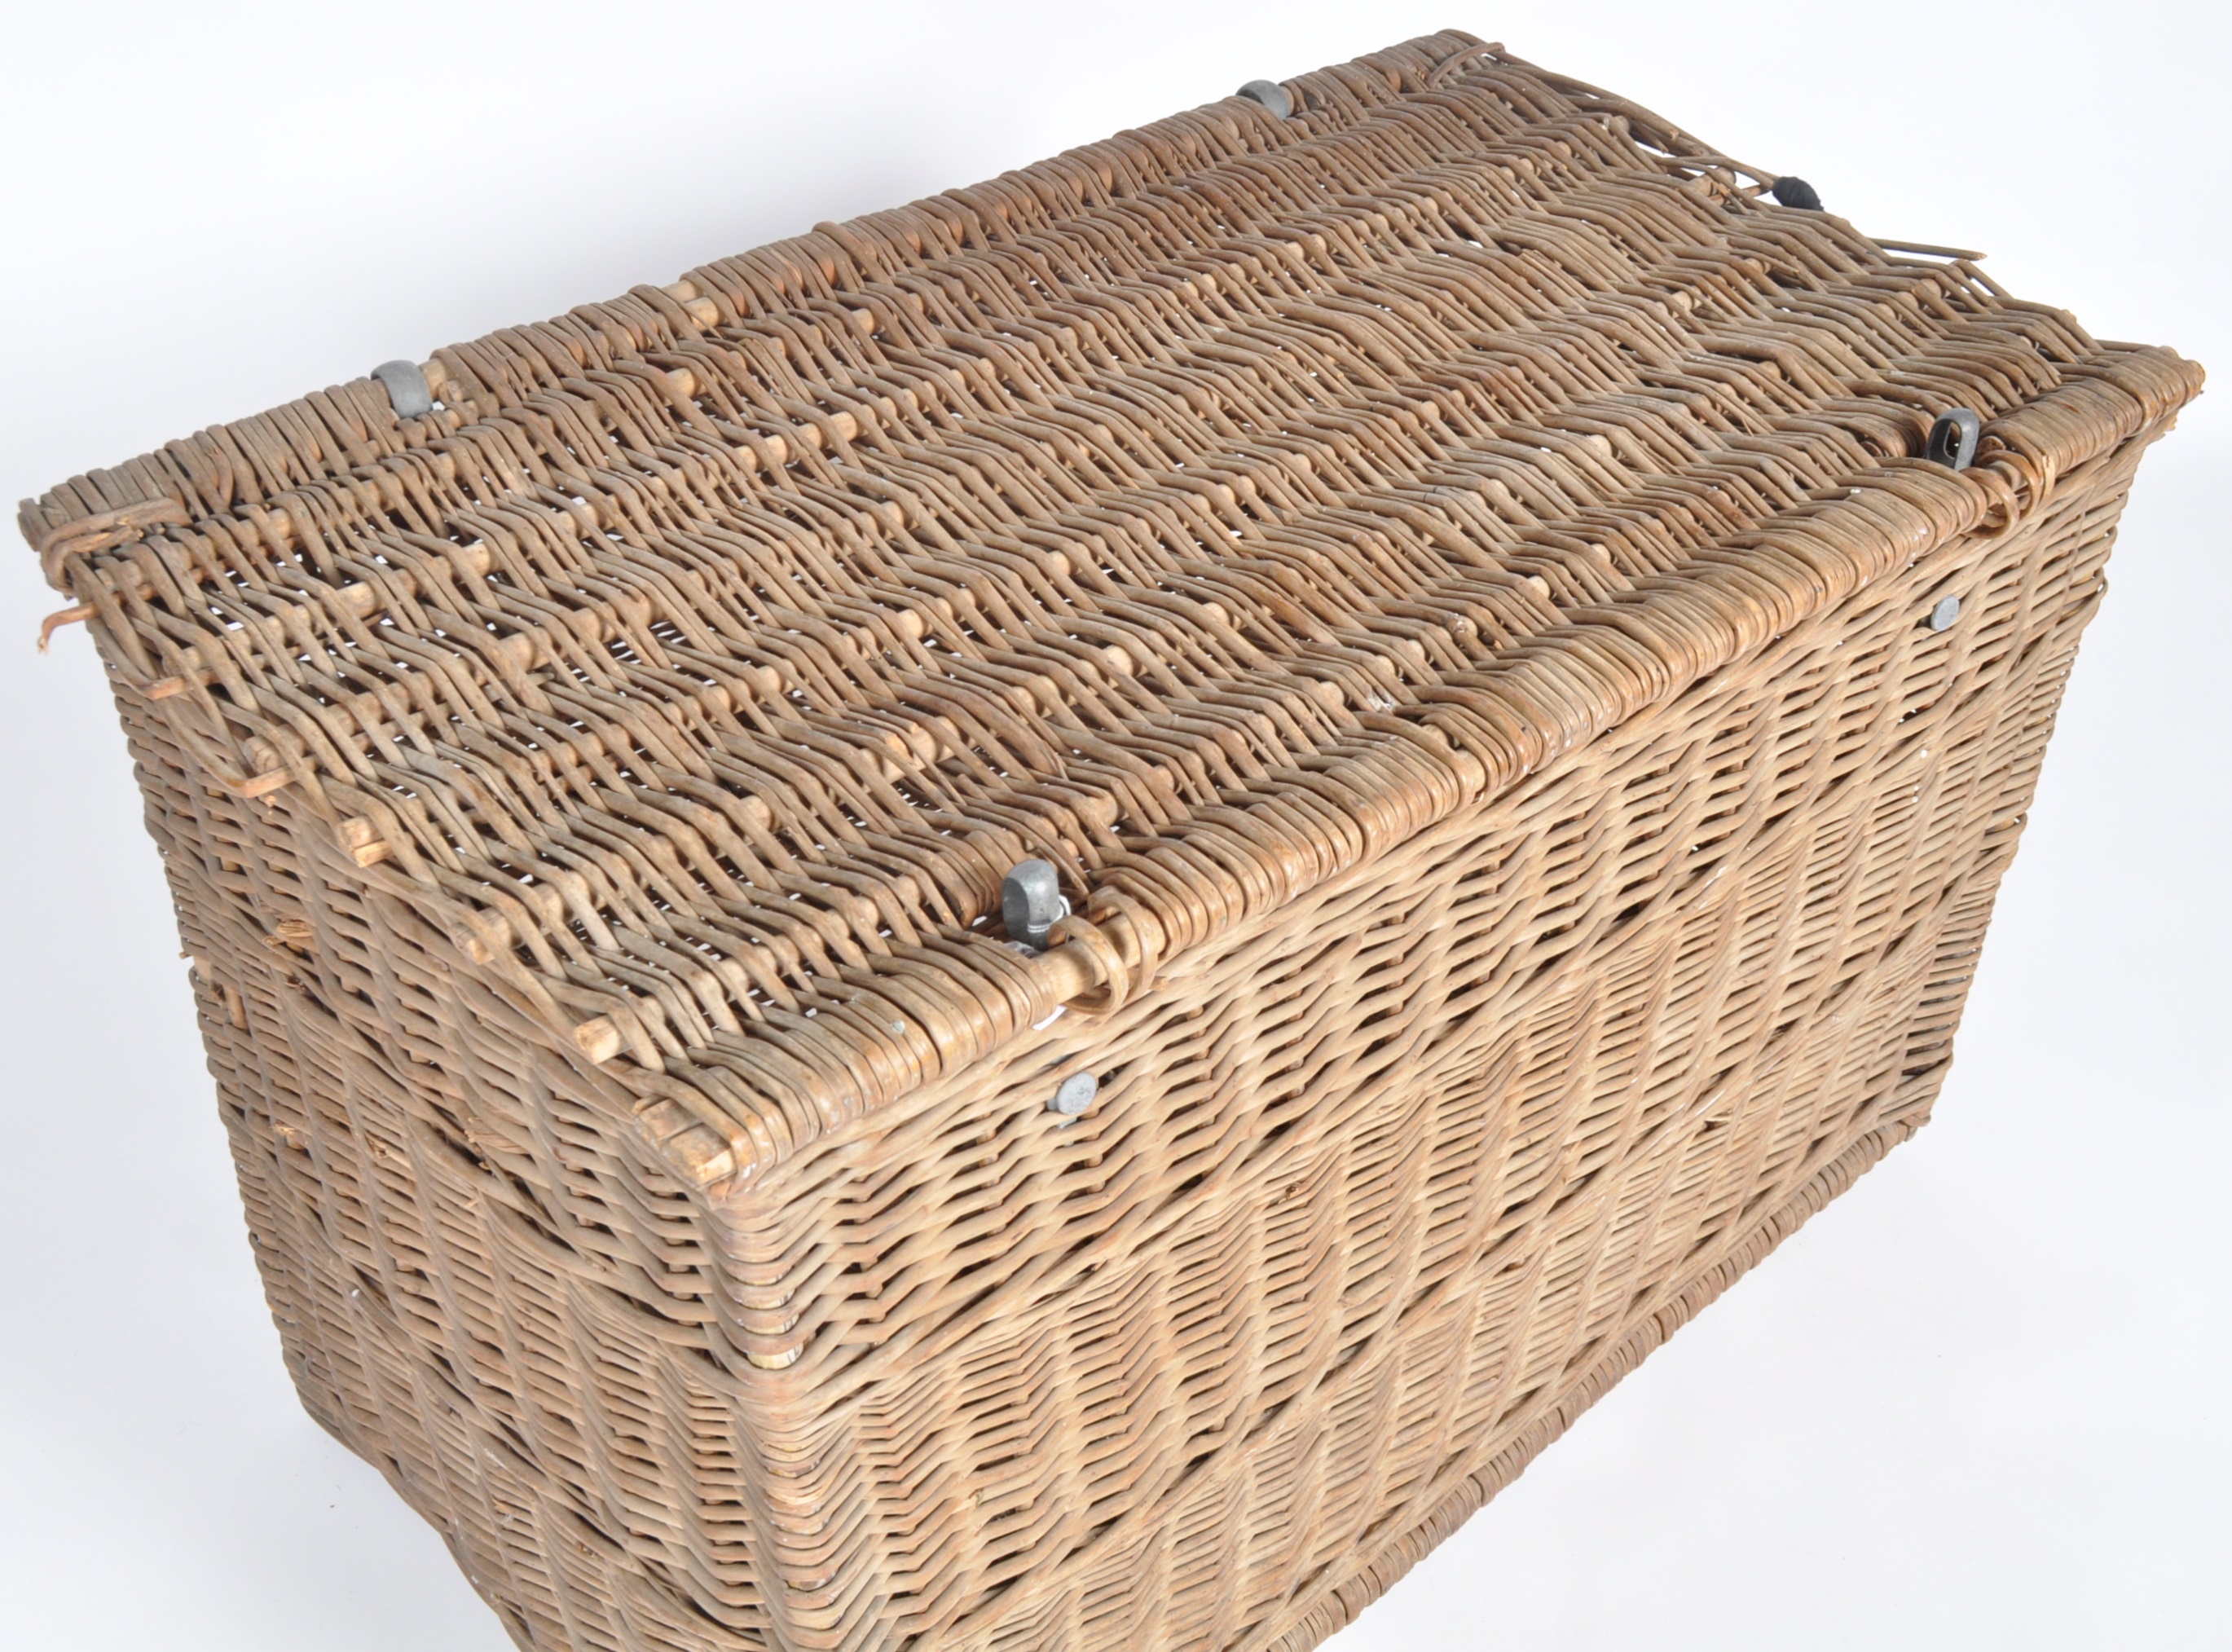 LARGE EARLY 20TH CENTURY WICKER BASKET - Image 3 of 5